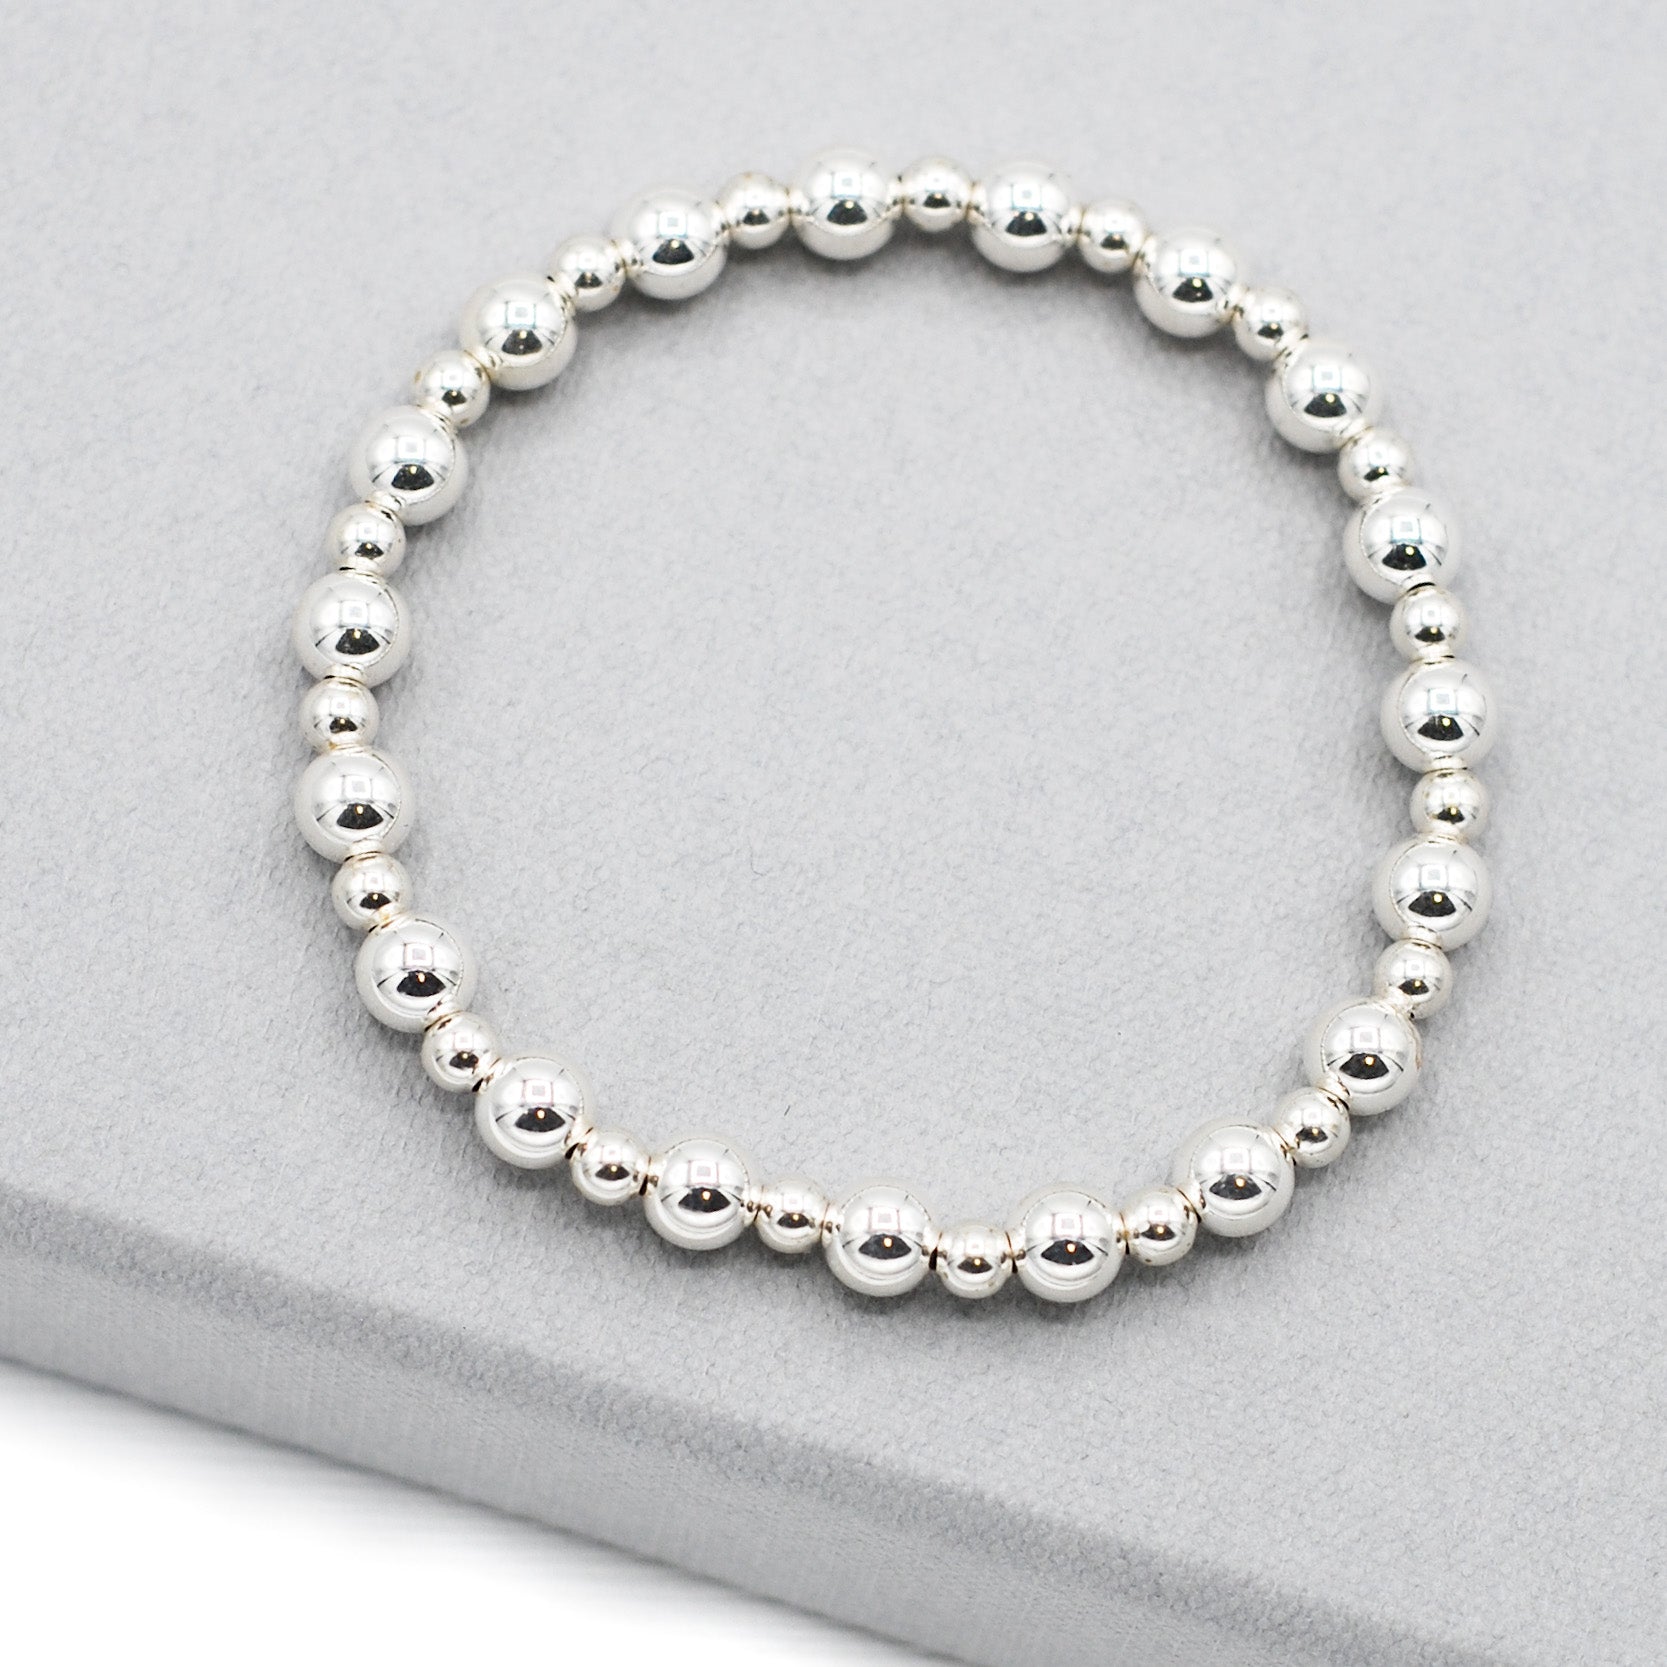 4mm & 6mm Sterling Silver Beaded Bracelet Average (7 Inches)